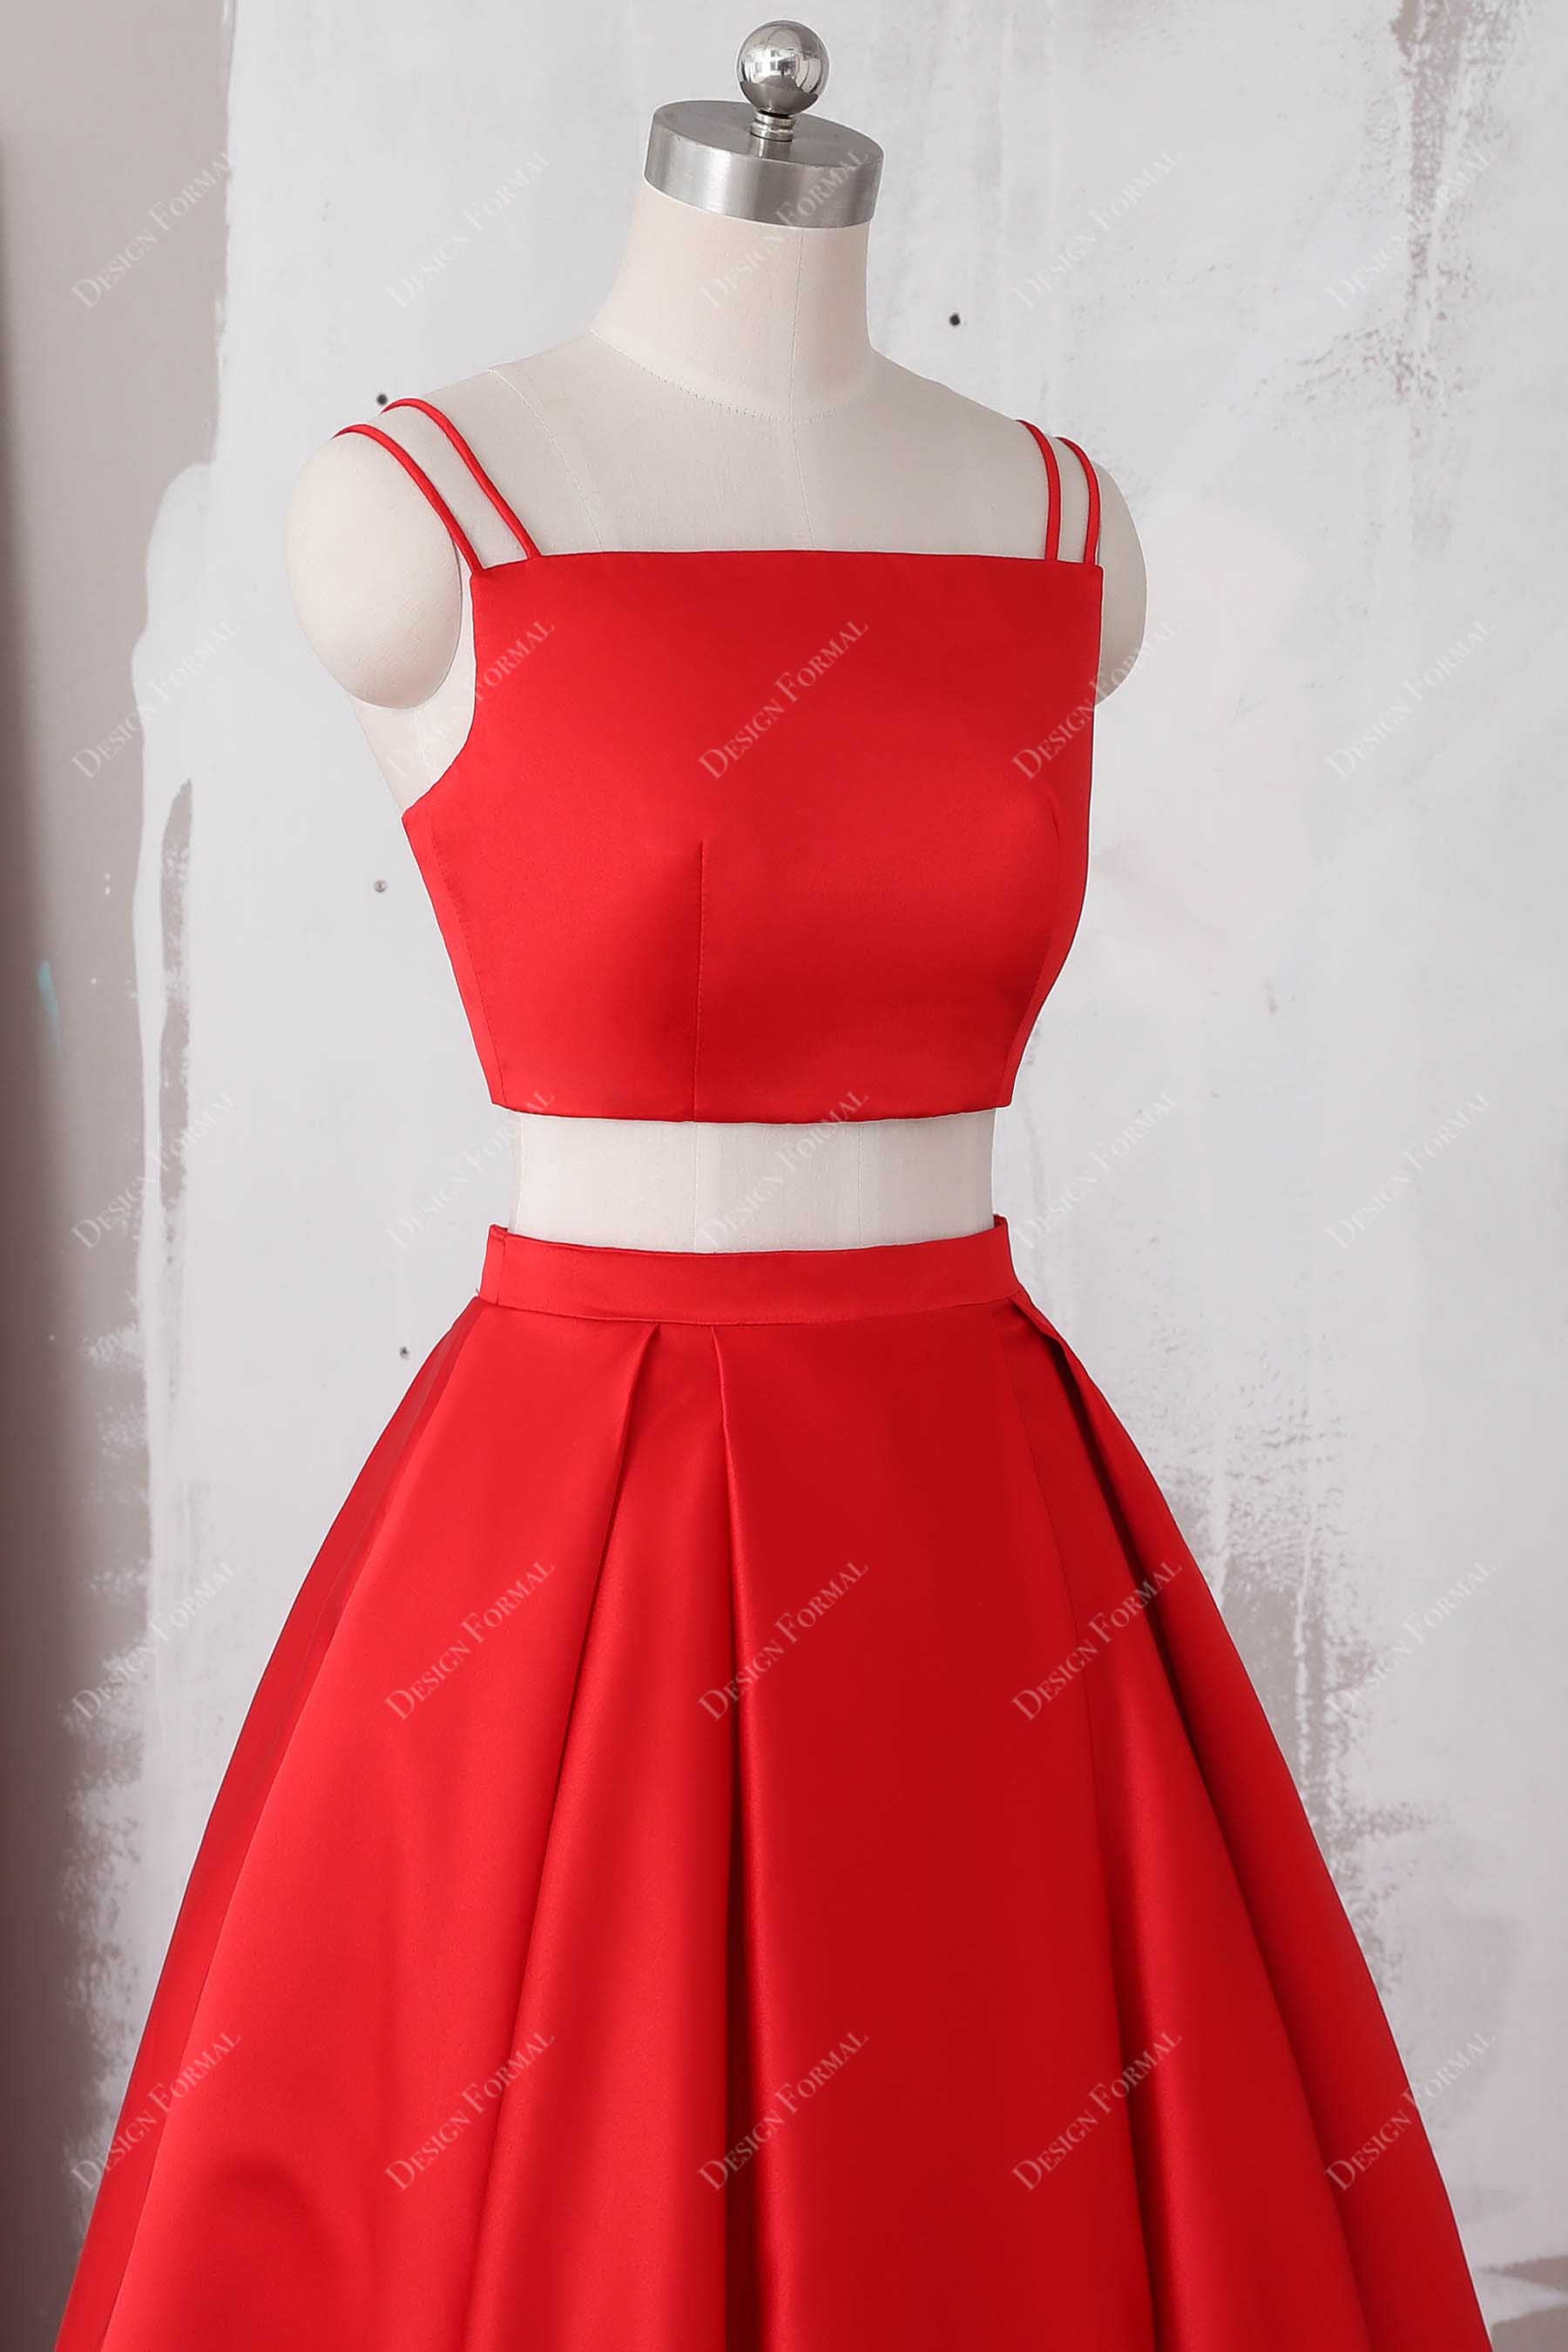 sleeveless red satin double straps crop top